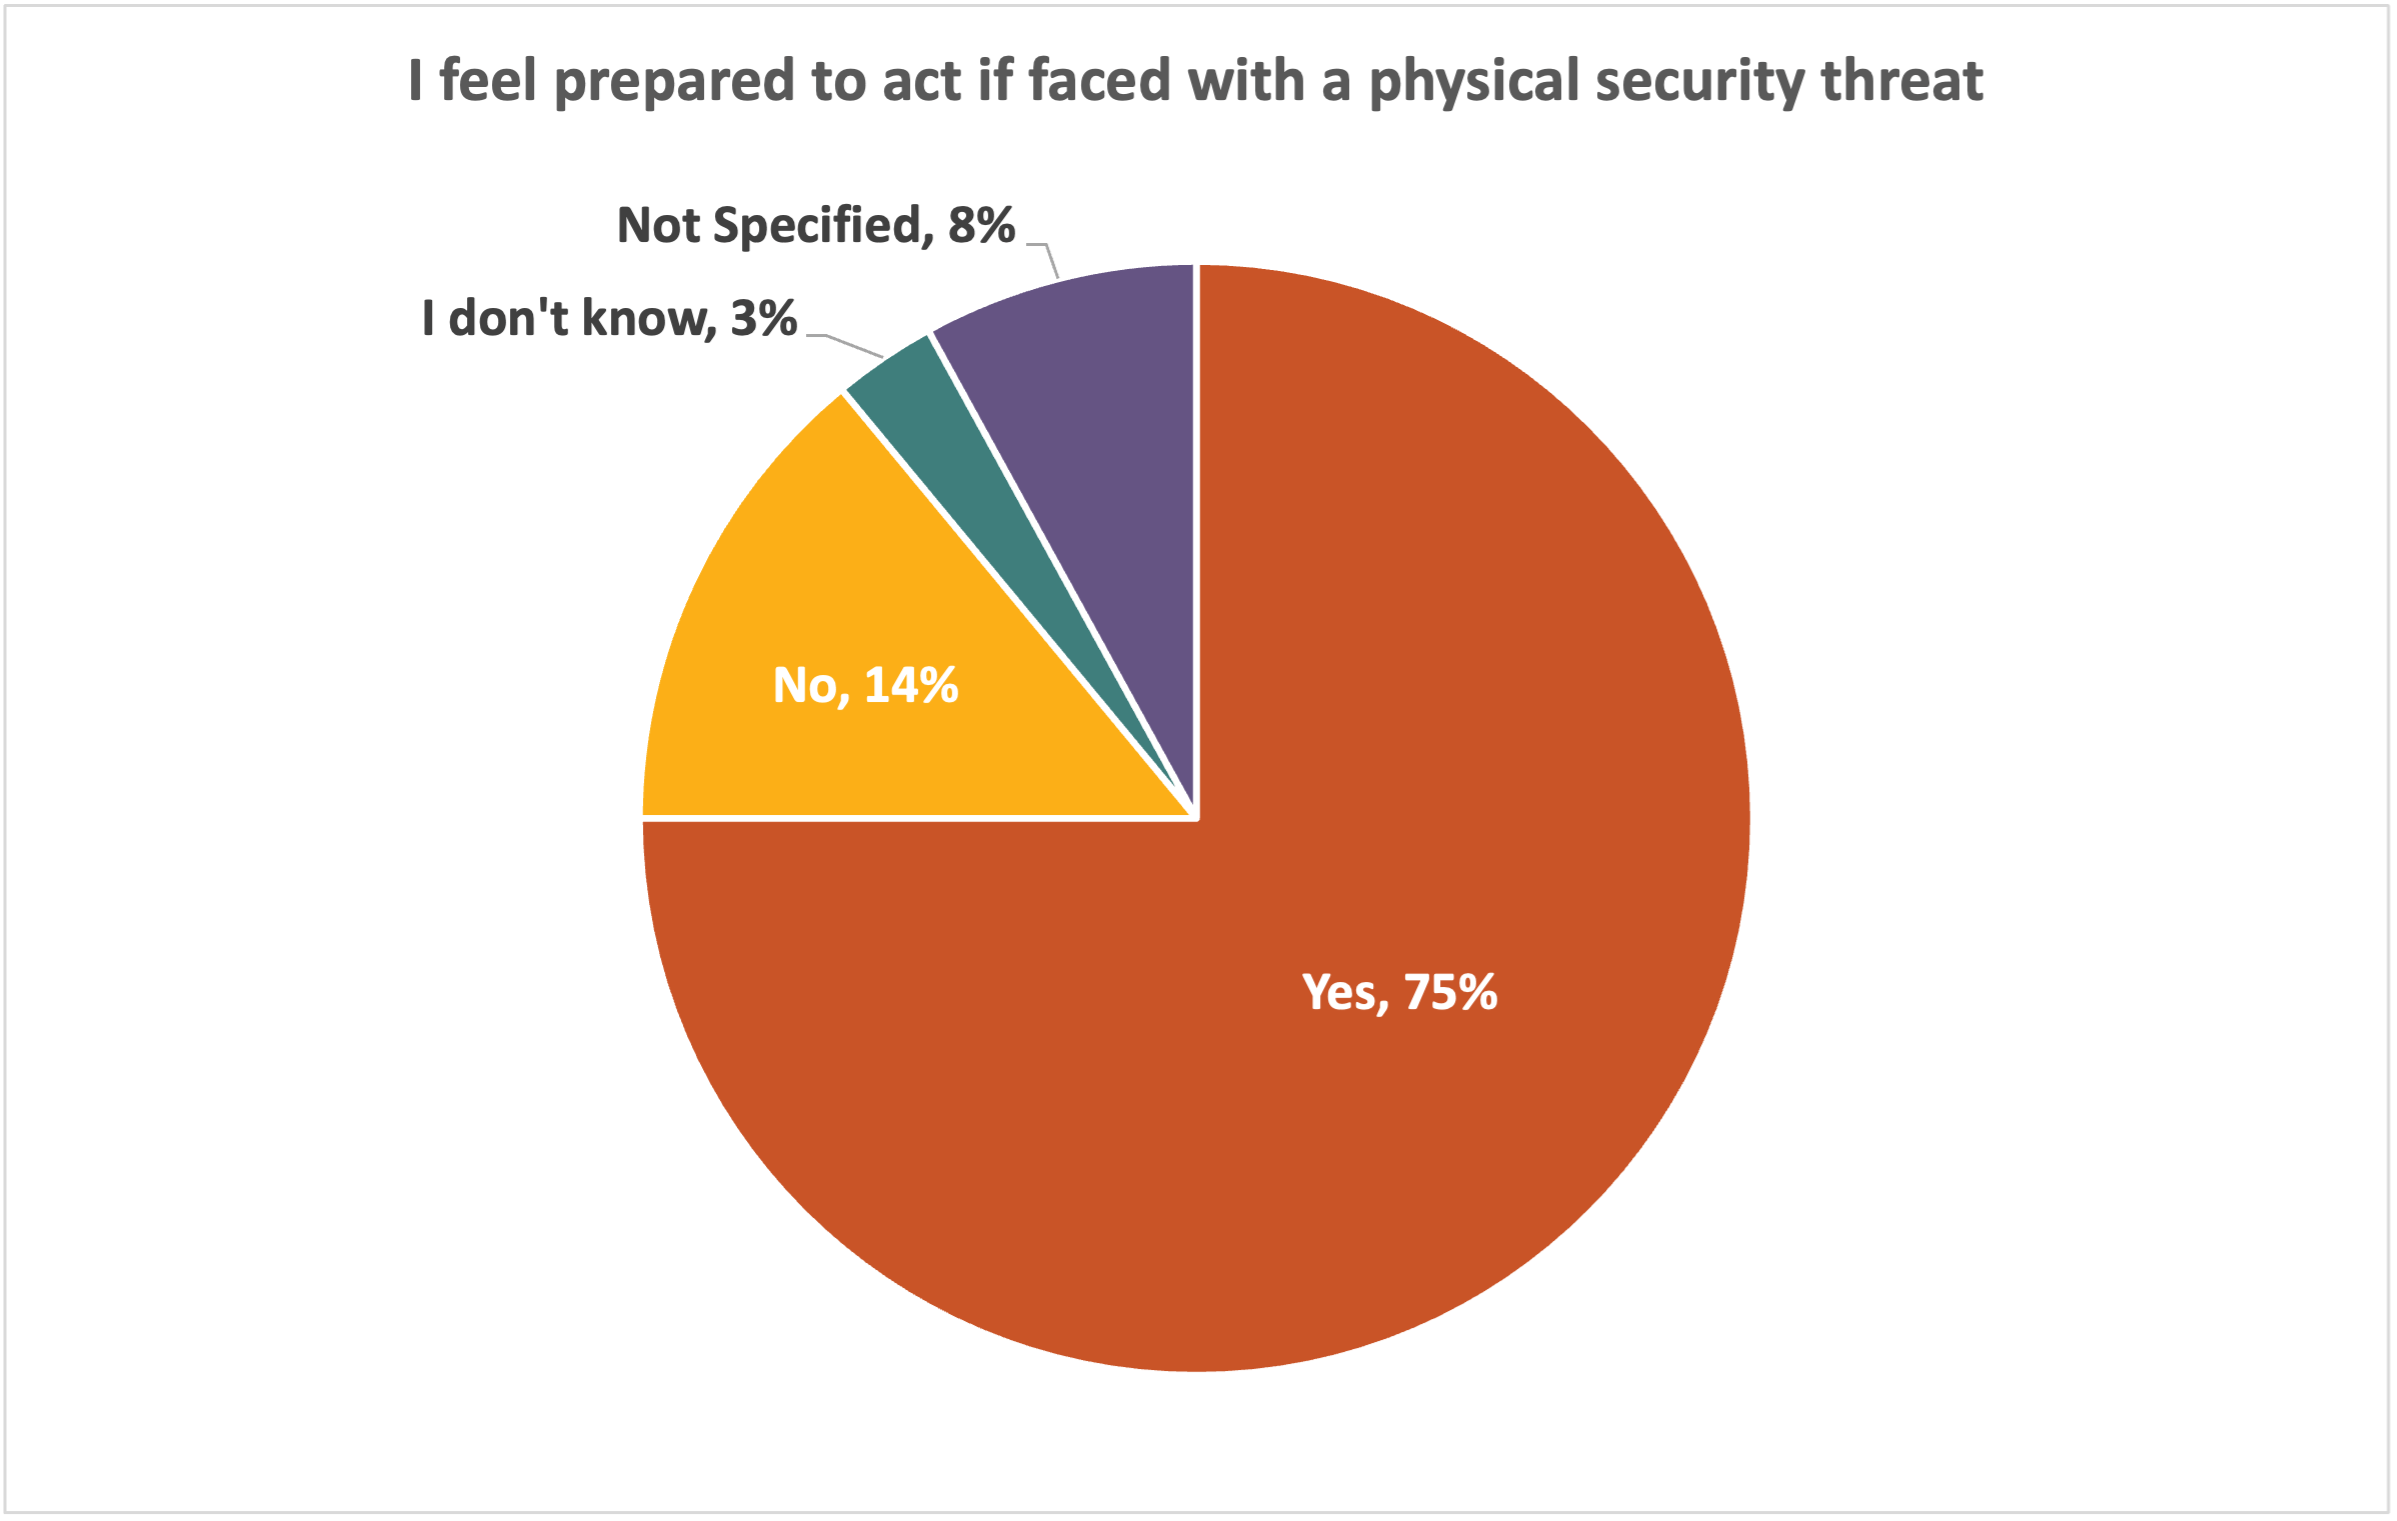 Chart of responses for the question "I feel prepared to act if faced with a physical security threat." Yes: 75%. No: 14%. I don't know: 3%. Not specified: 8%.